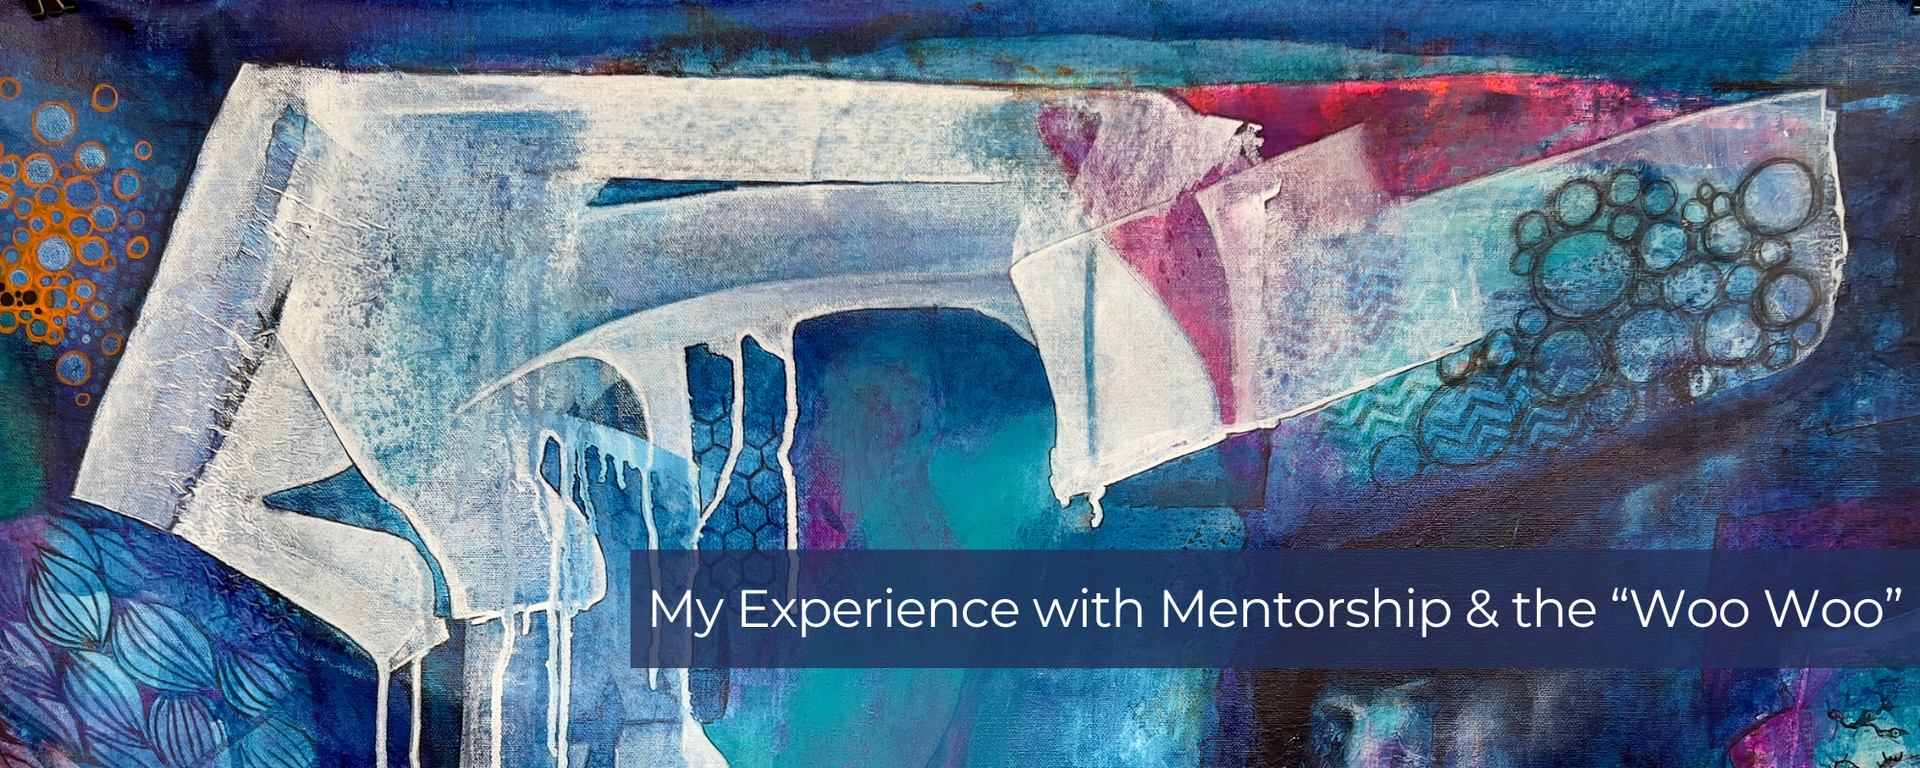 My Experience with Mentorship and the “Woo Woo”